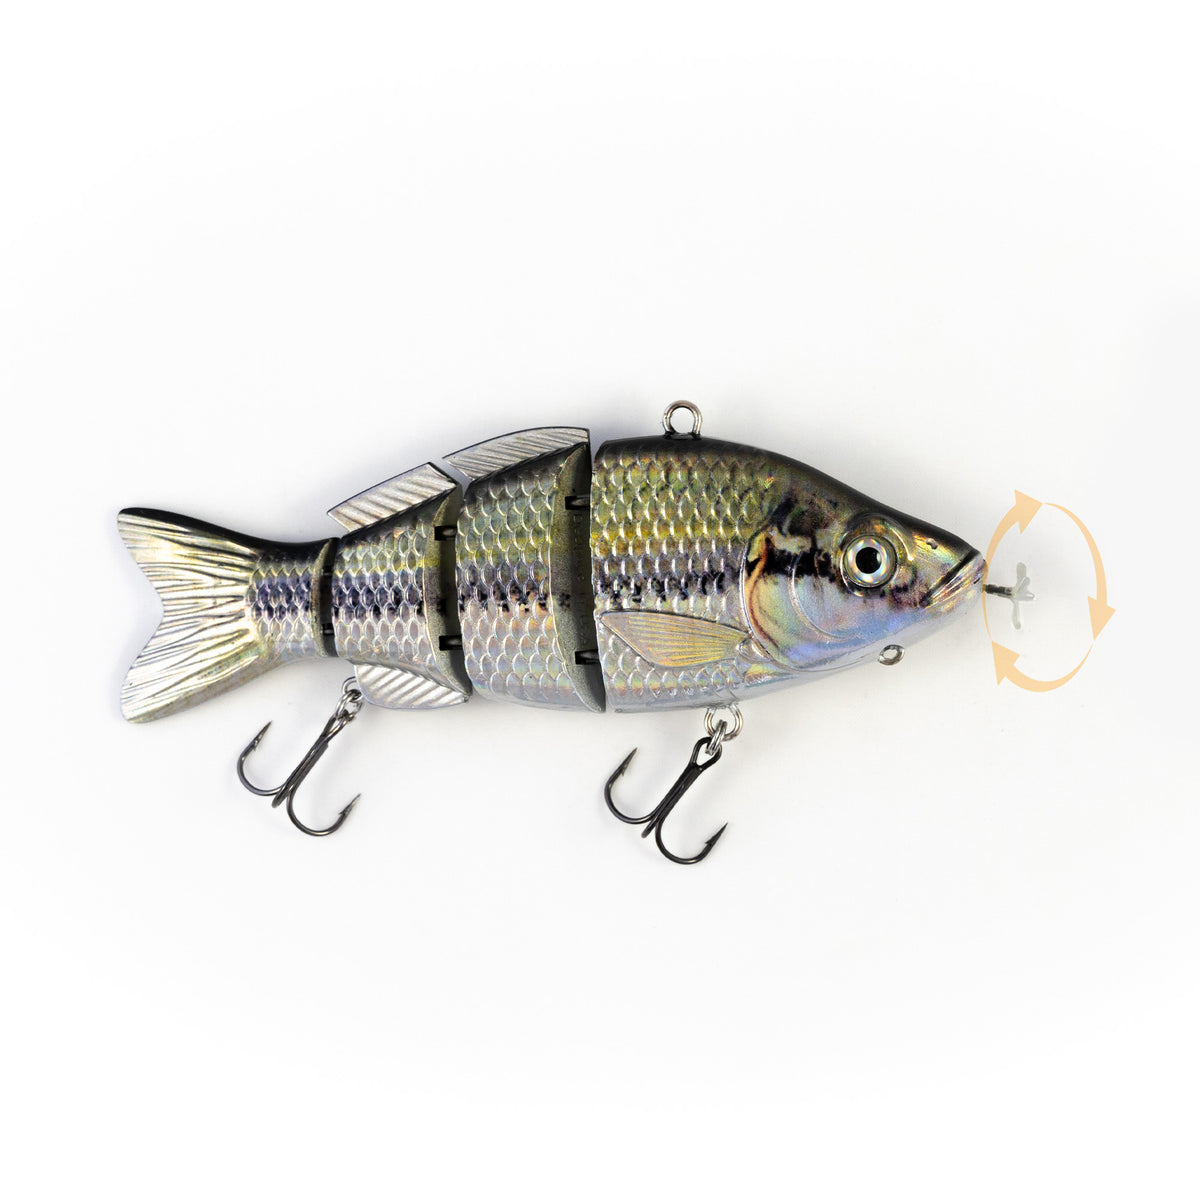 Largemouth Bass specialty – Animated Lure